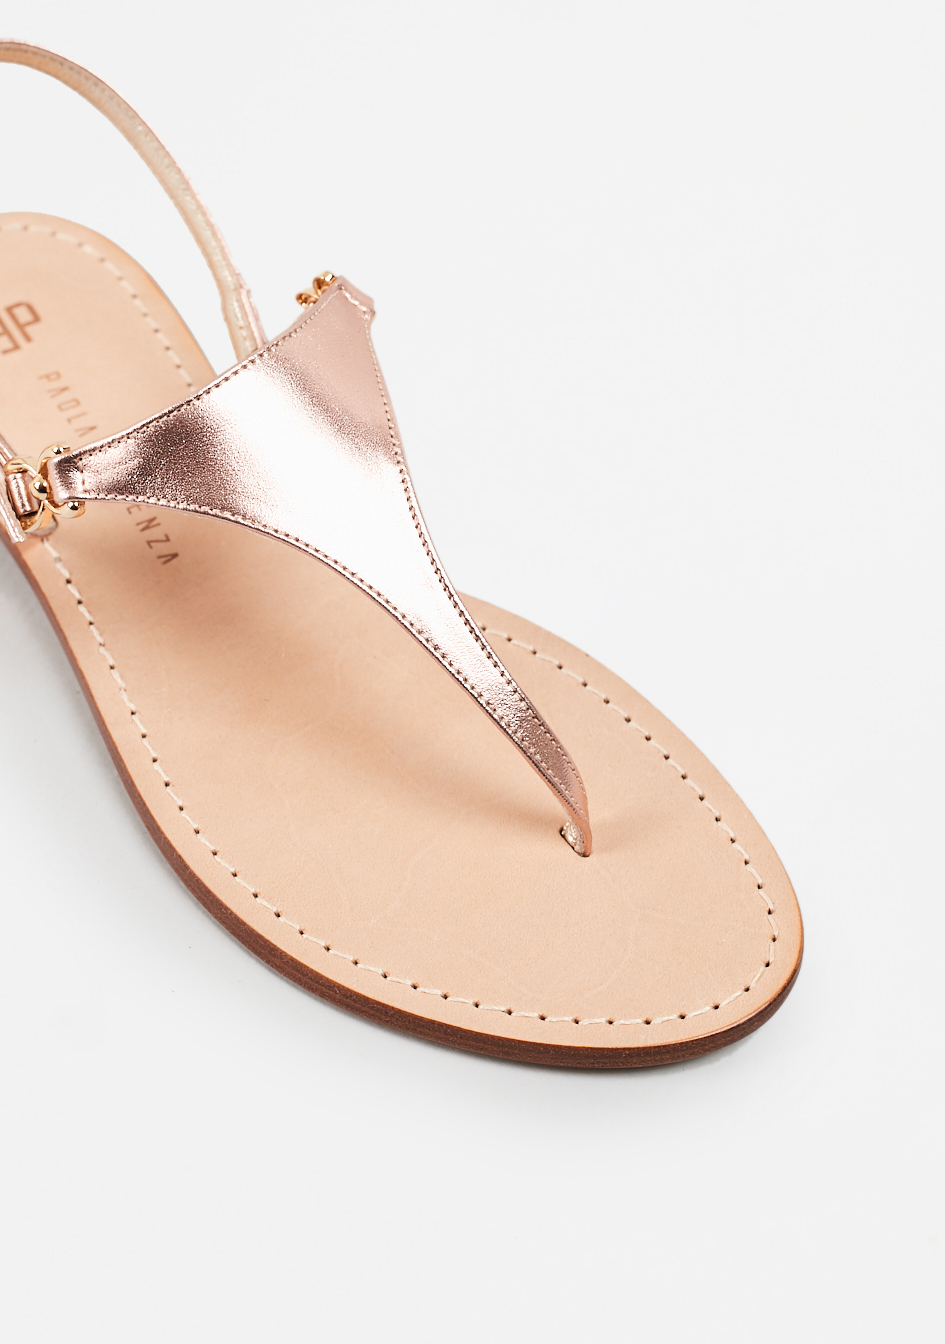 copper leather sandals